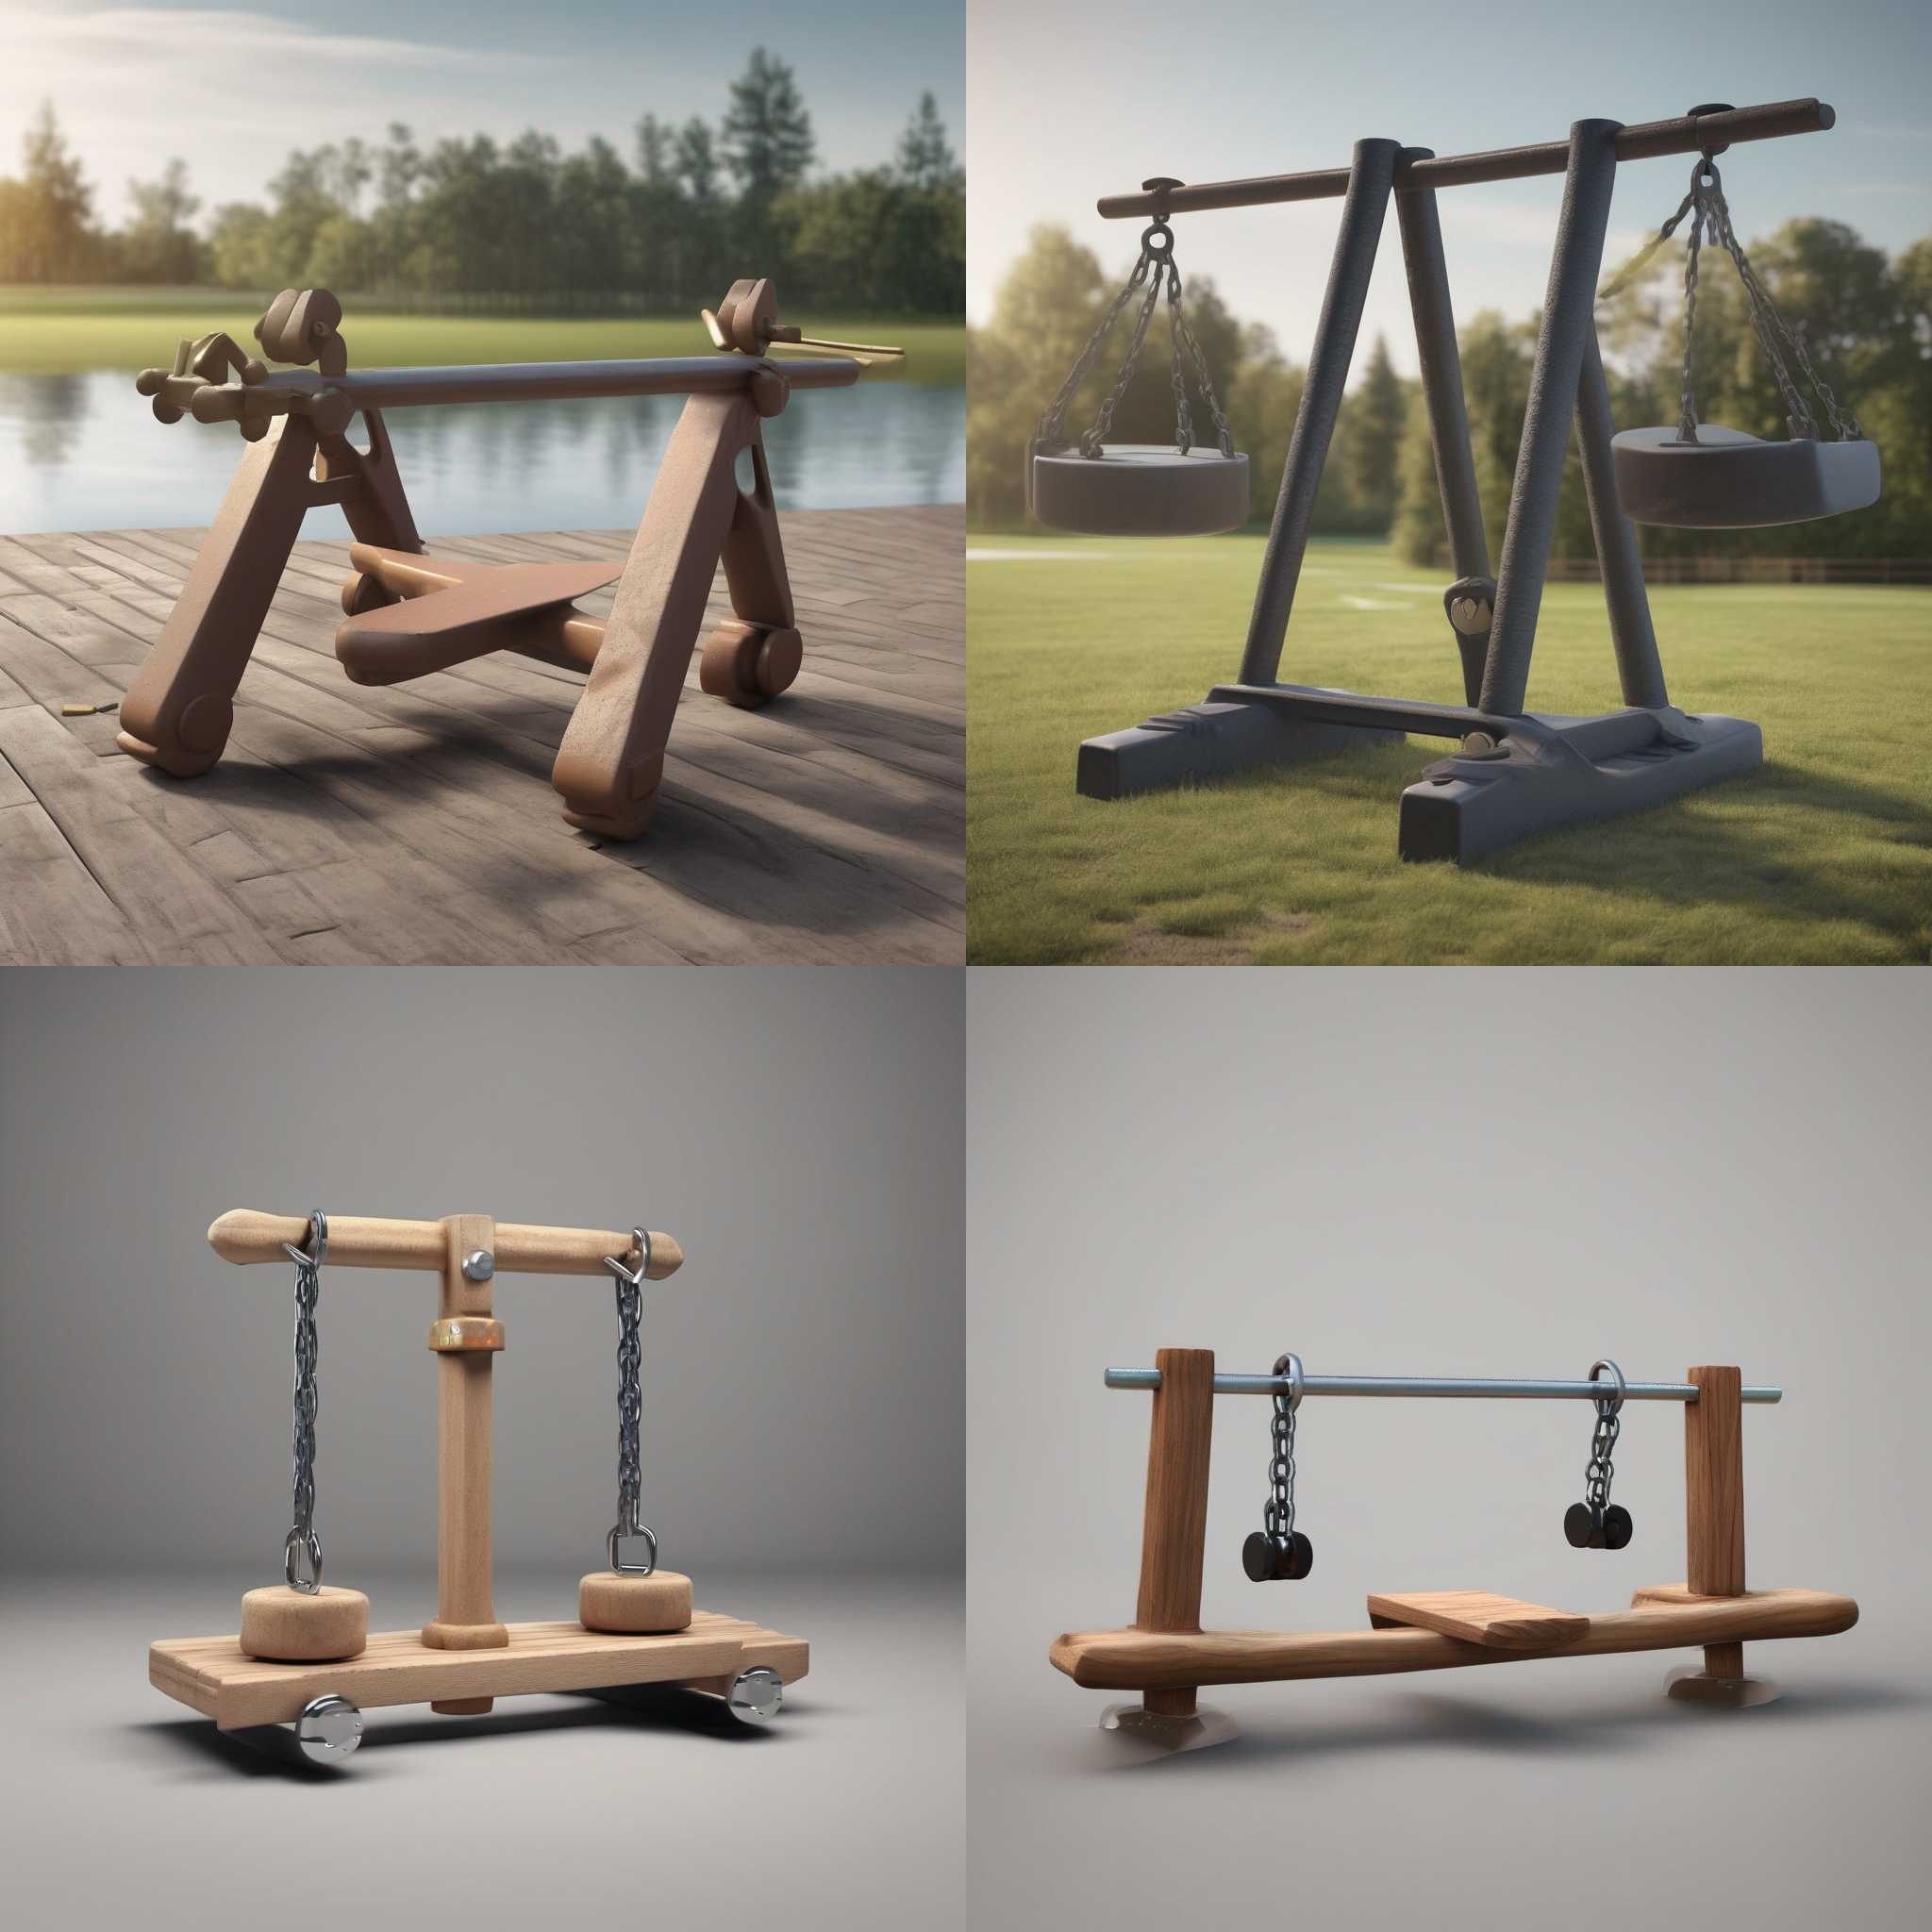 A seesaw with even weights on both sides